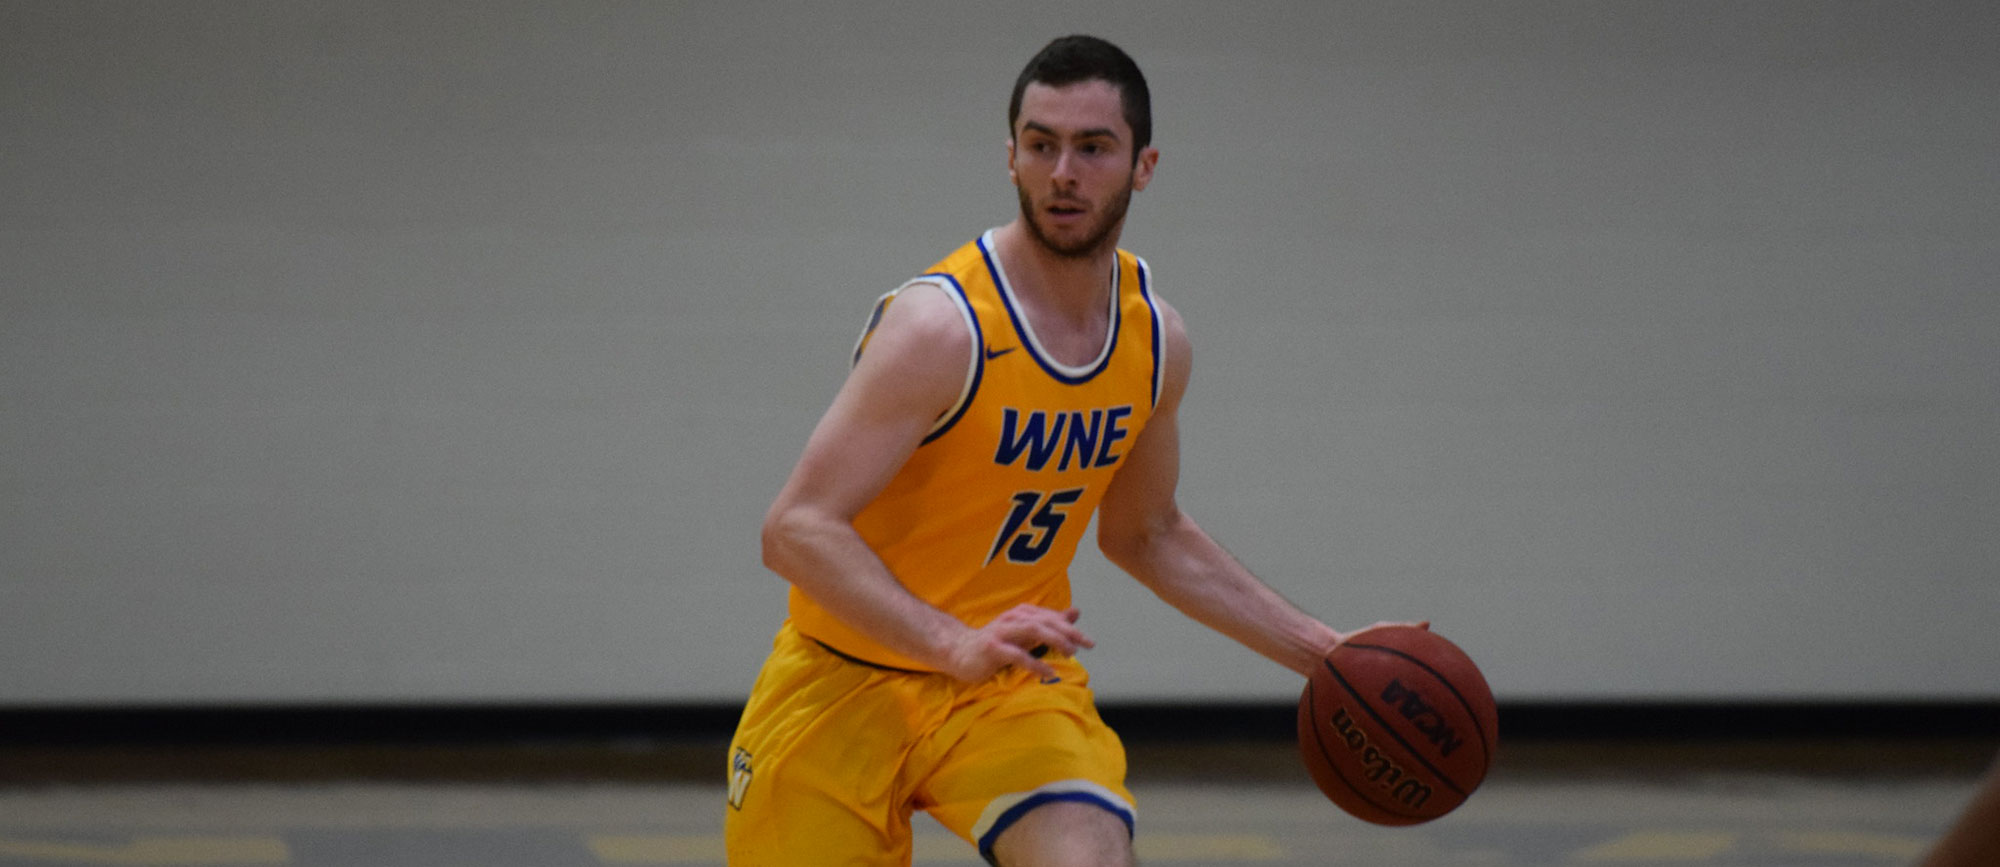 Mike McGuire scored 23 points in the come from behind win over Salve Regina on Saturday afternoon. (Photo by Rachael Margossian)